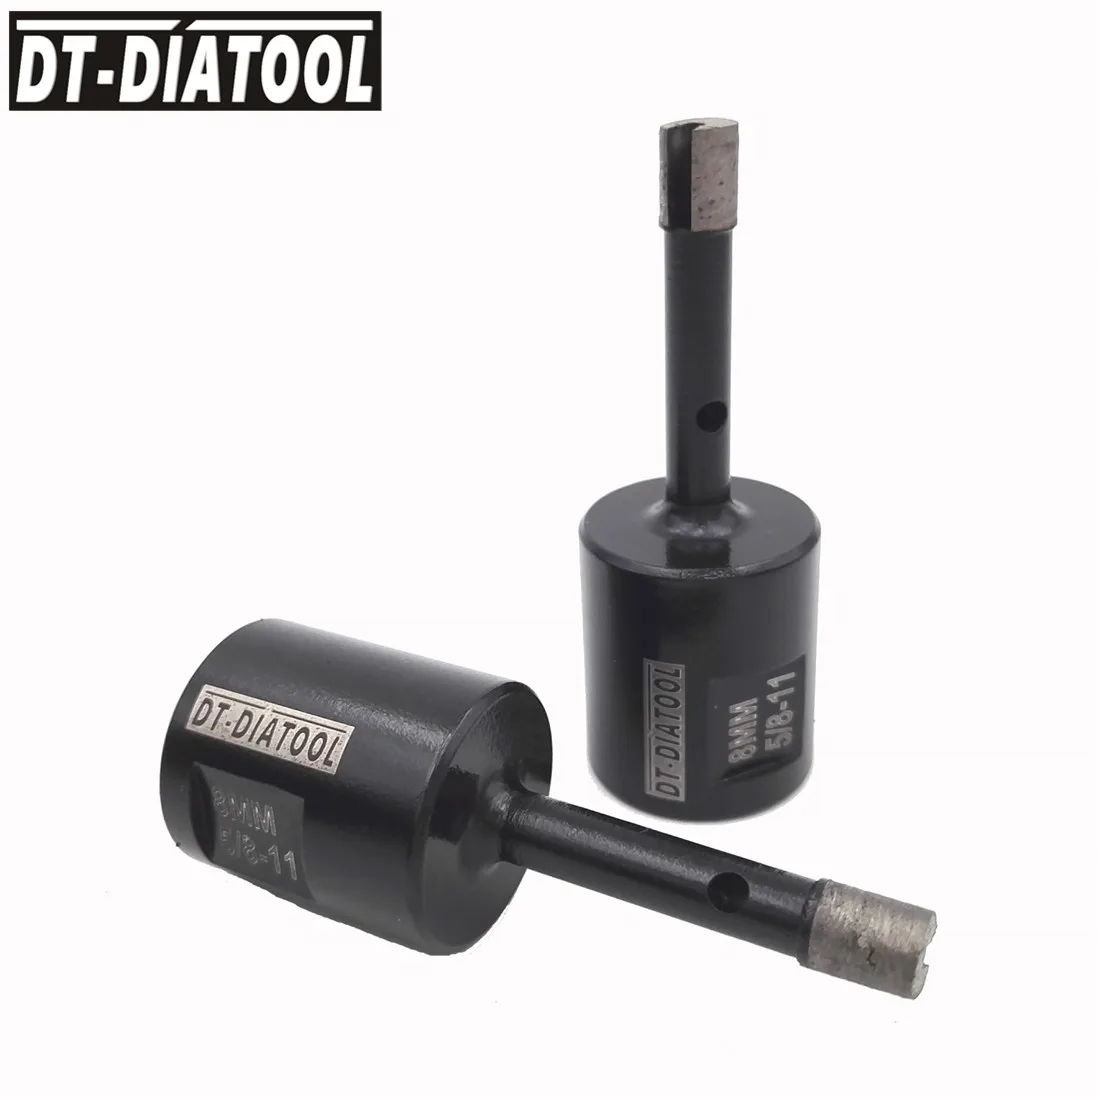 DT-DIATOOL 2pcs 5/8-11 Thread Dia 8mm Welded Diamond Drilling Core Bits Drill Bits For Drilling Marble Granite Stone Hole Saw dt diatool 2pcs 5 8 11 thread dia 8mm welded diamond drilling core bits drill bits for drilling marble granite stone hole saw